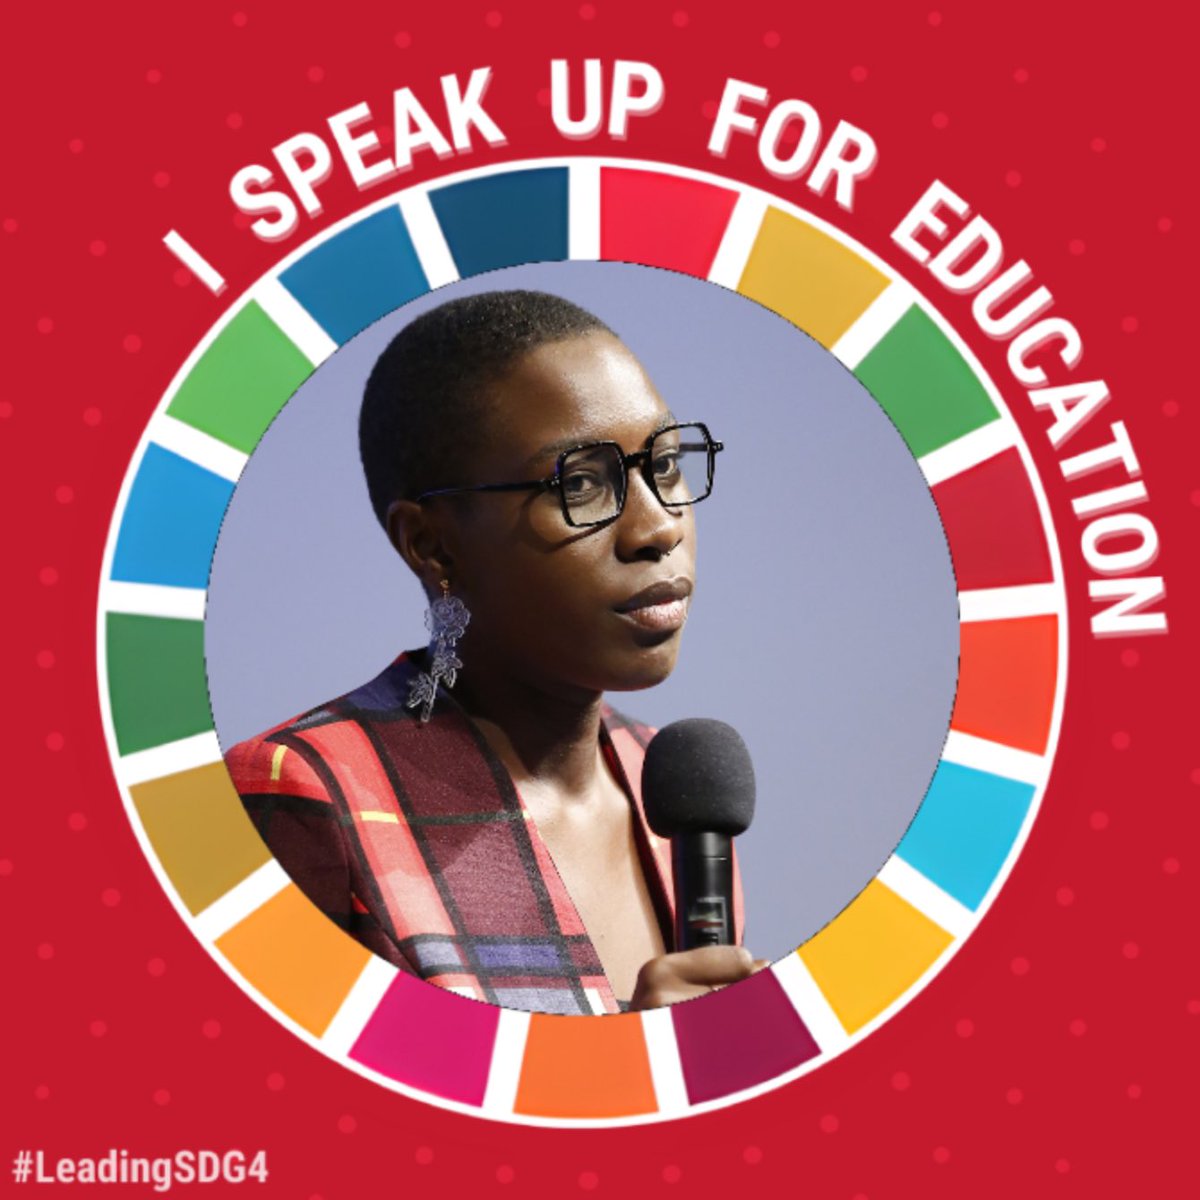 A quality education is gender transformative. It focuses on the whole student both in and out of the classroom.

This #EducationDay let’s call on world leaders to invest in education. Join me #LeadingSDG4 ... app.cheerity.com/1u4B0Ug2I/23/p…

#EducationShiftsPower